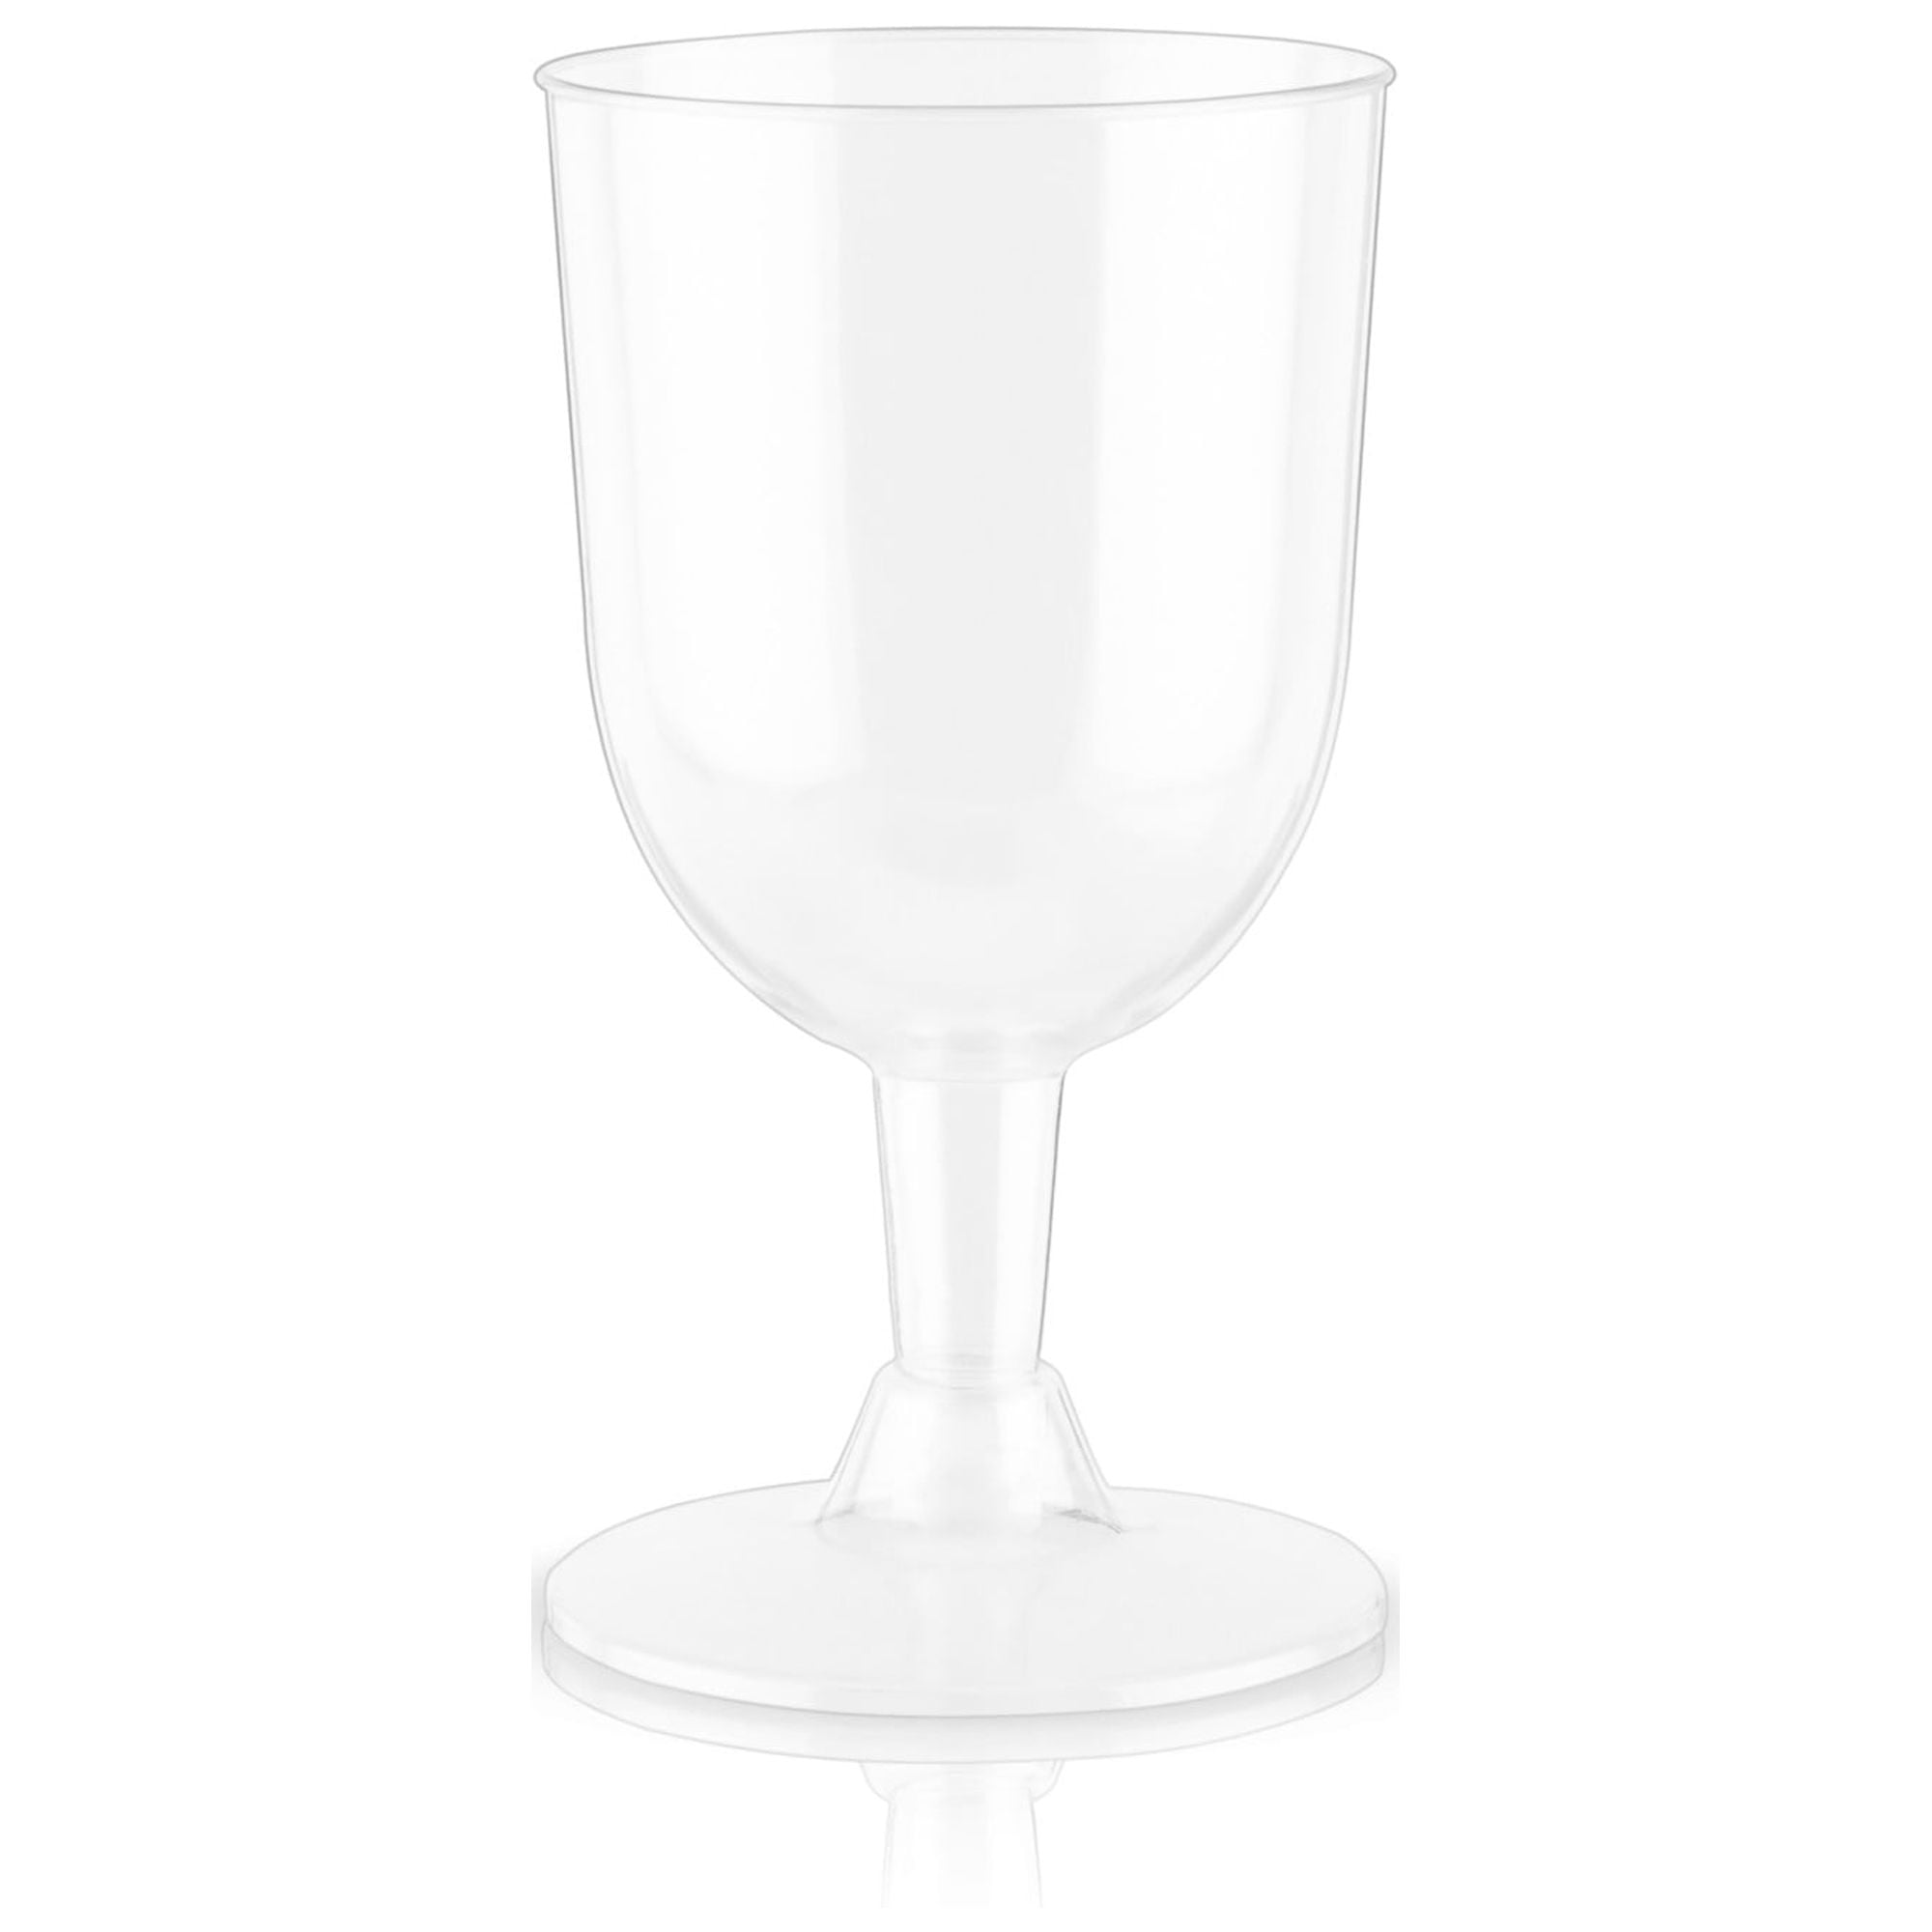 True Party Disposable Plastic Wine Glasses, Stemmed Clear Plastic Cups ...